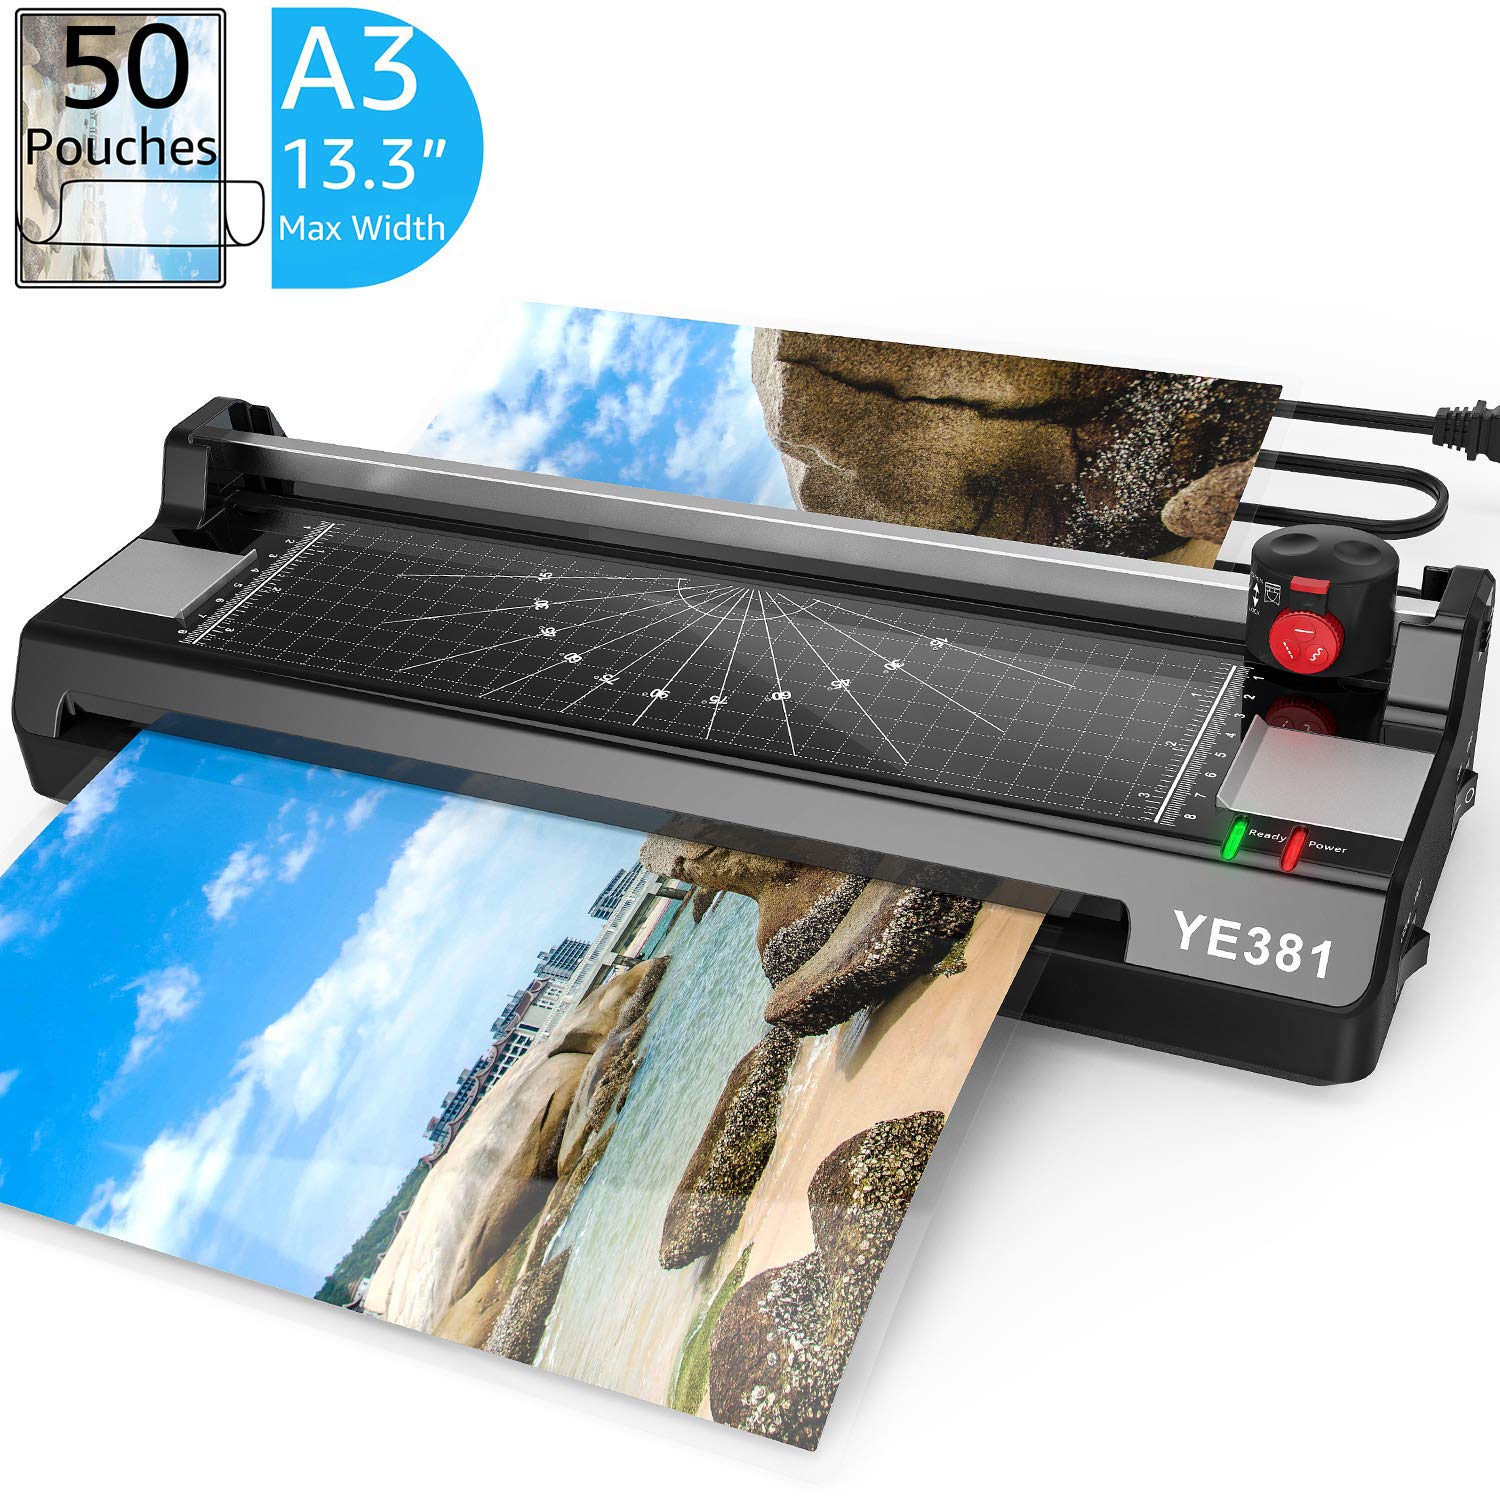 10 Best Laminating Machines 2020 Reviews & Buying Guide - Certain Doubts How Long Does It Take A Laminator To Heat Up